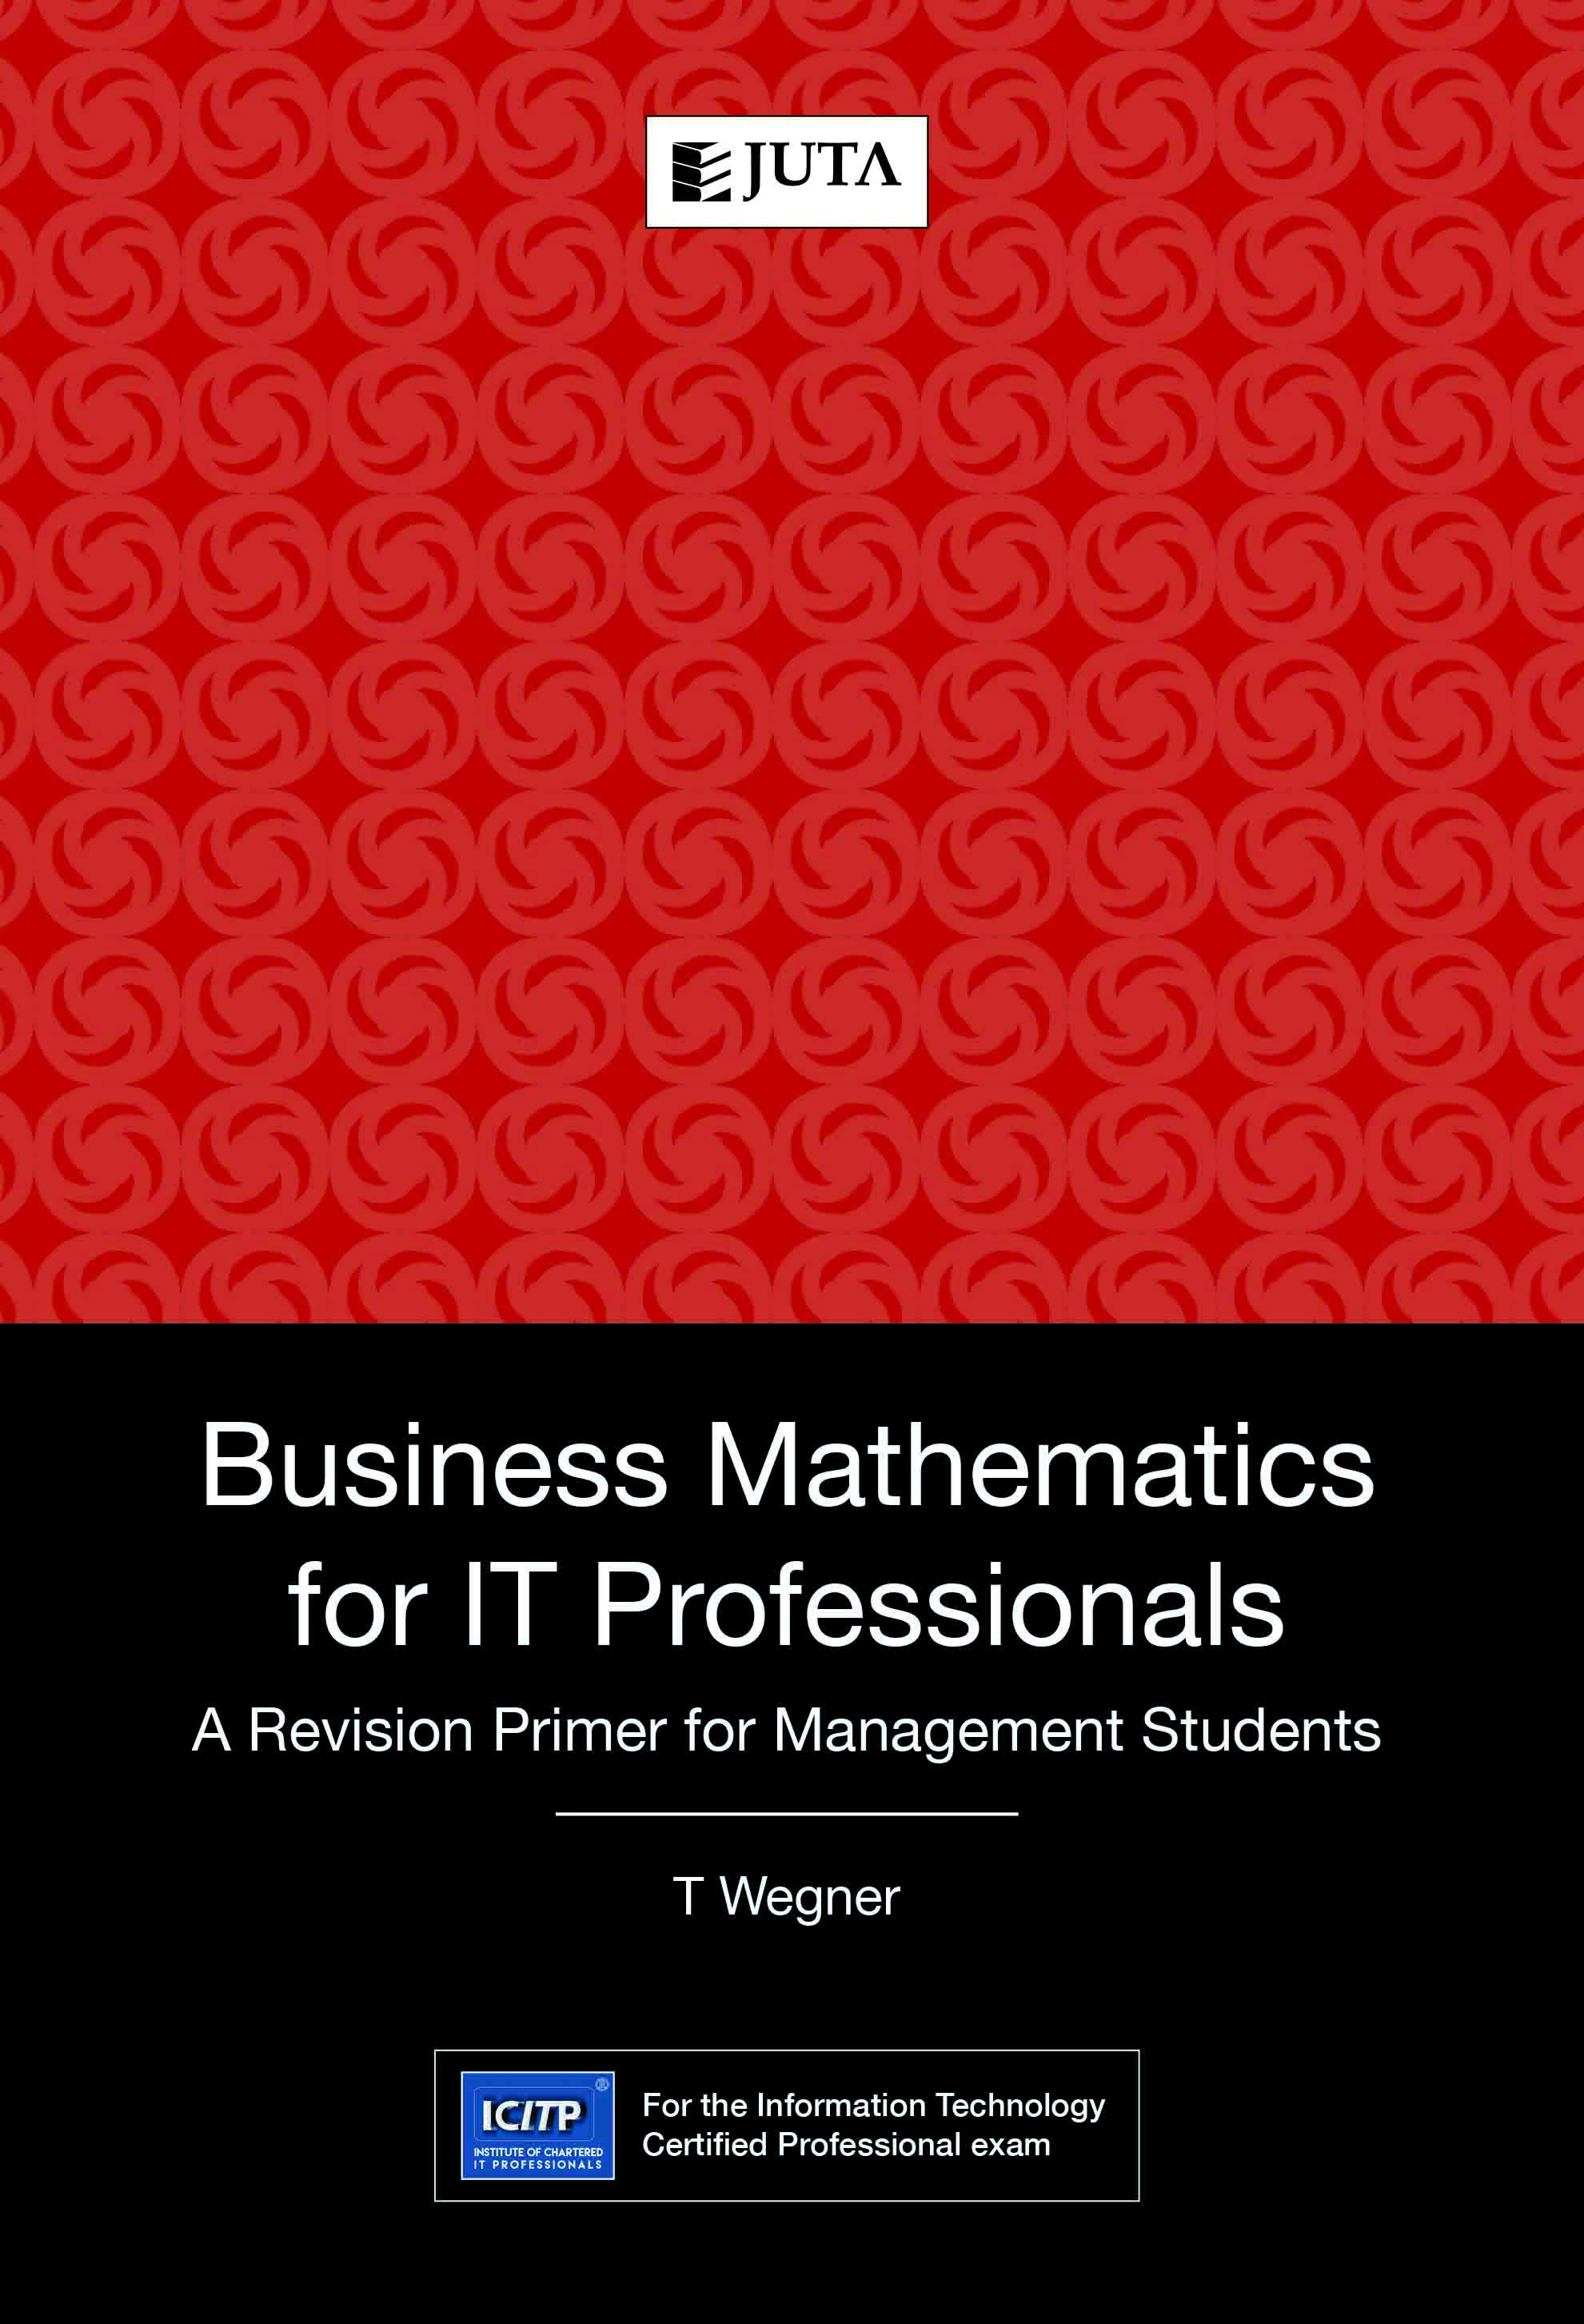 Business Mathematics for IT Professionals